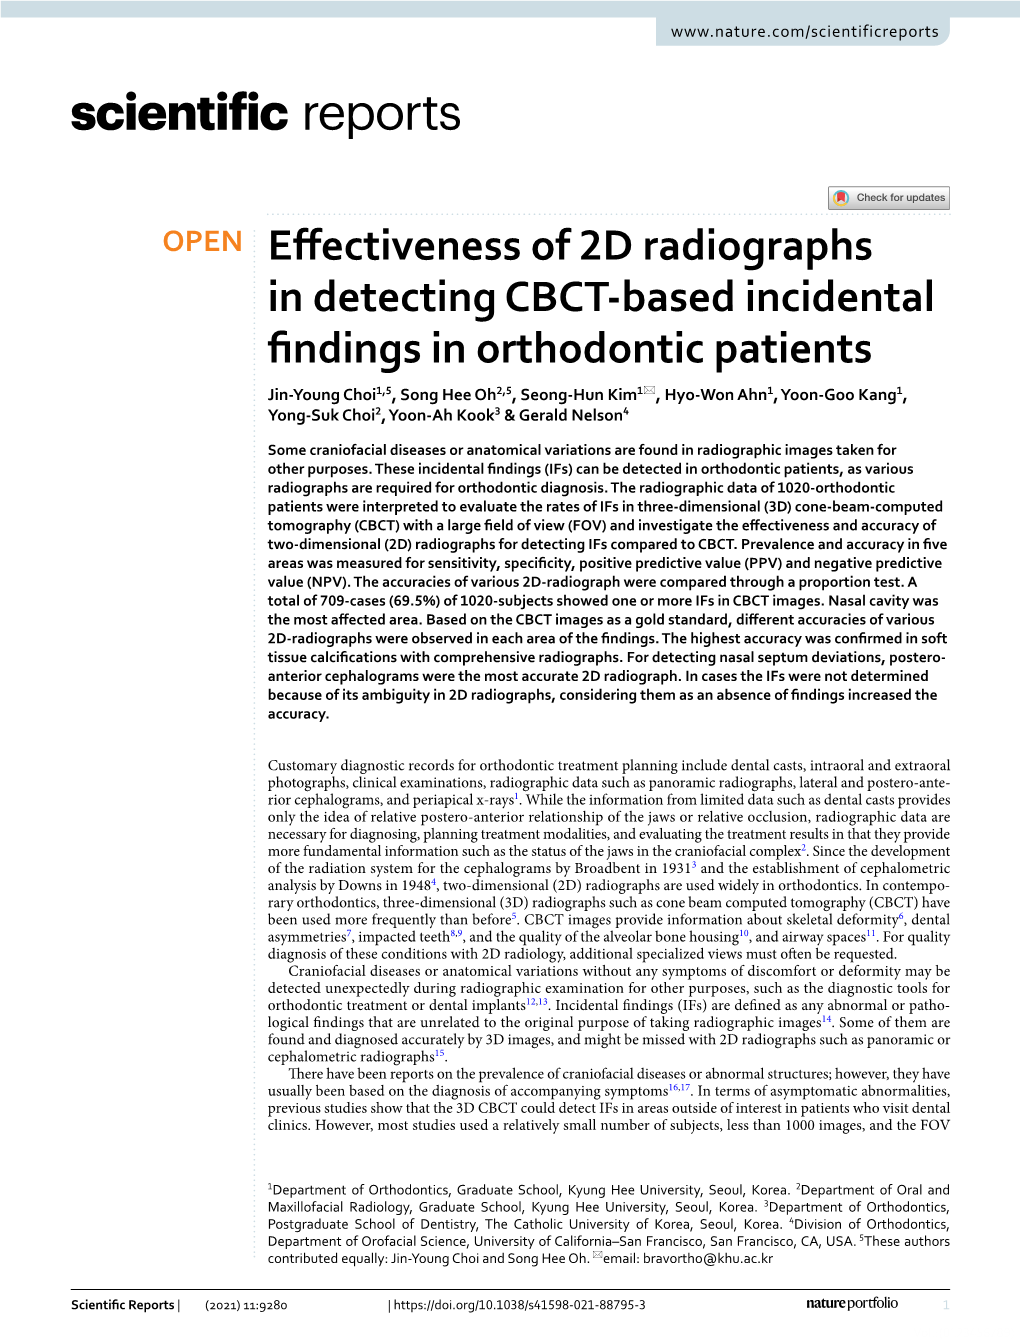 Effectiveness of 2D Radiographs in Detecting CBCT-Based Incidental